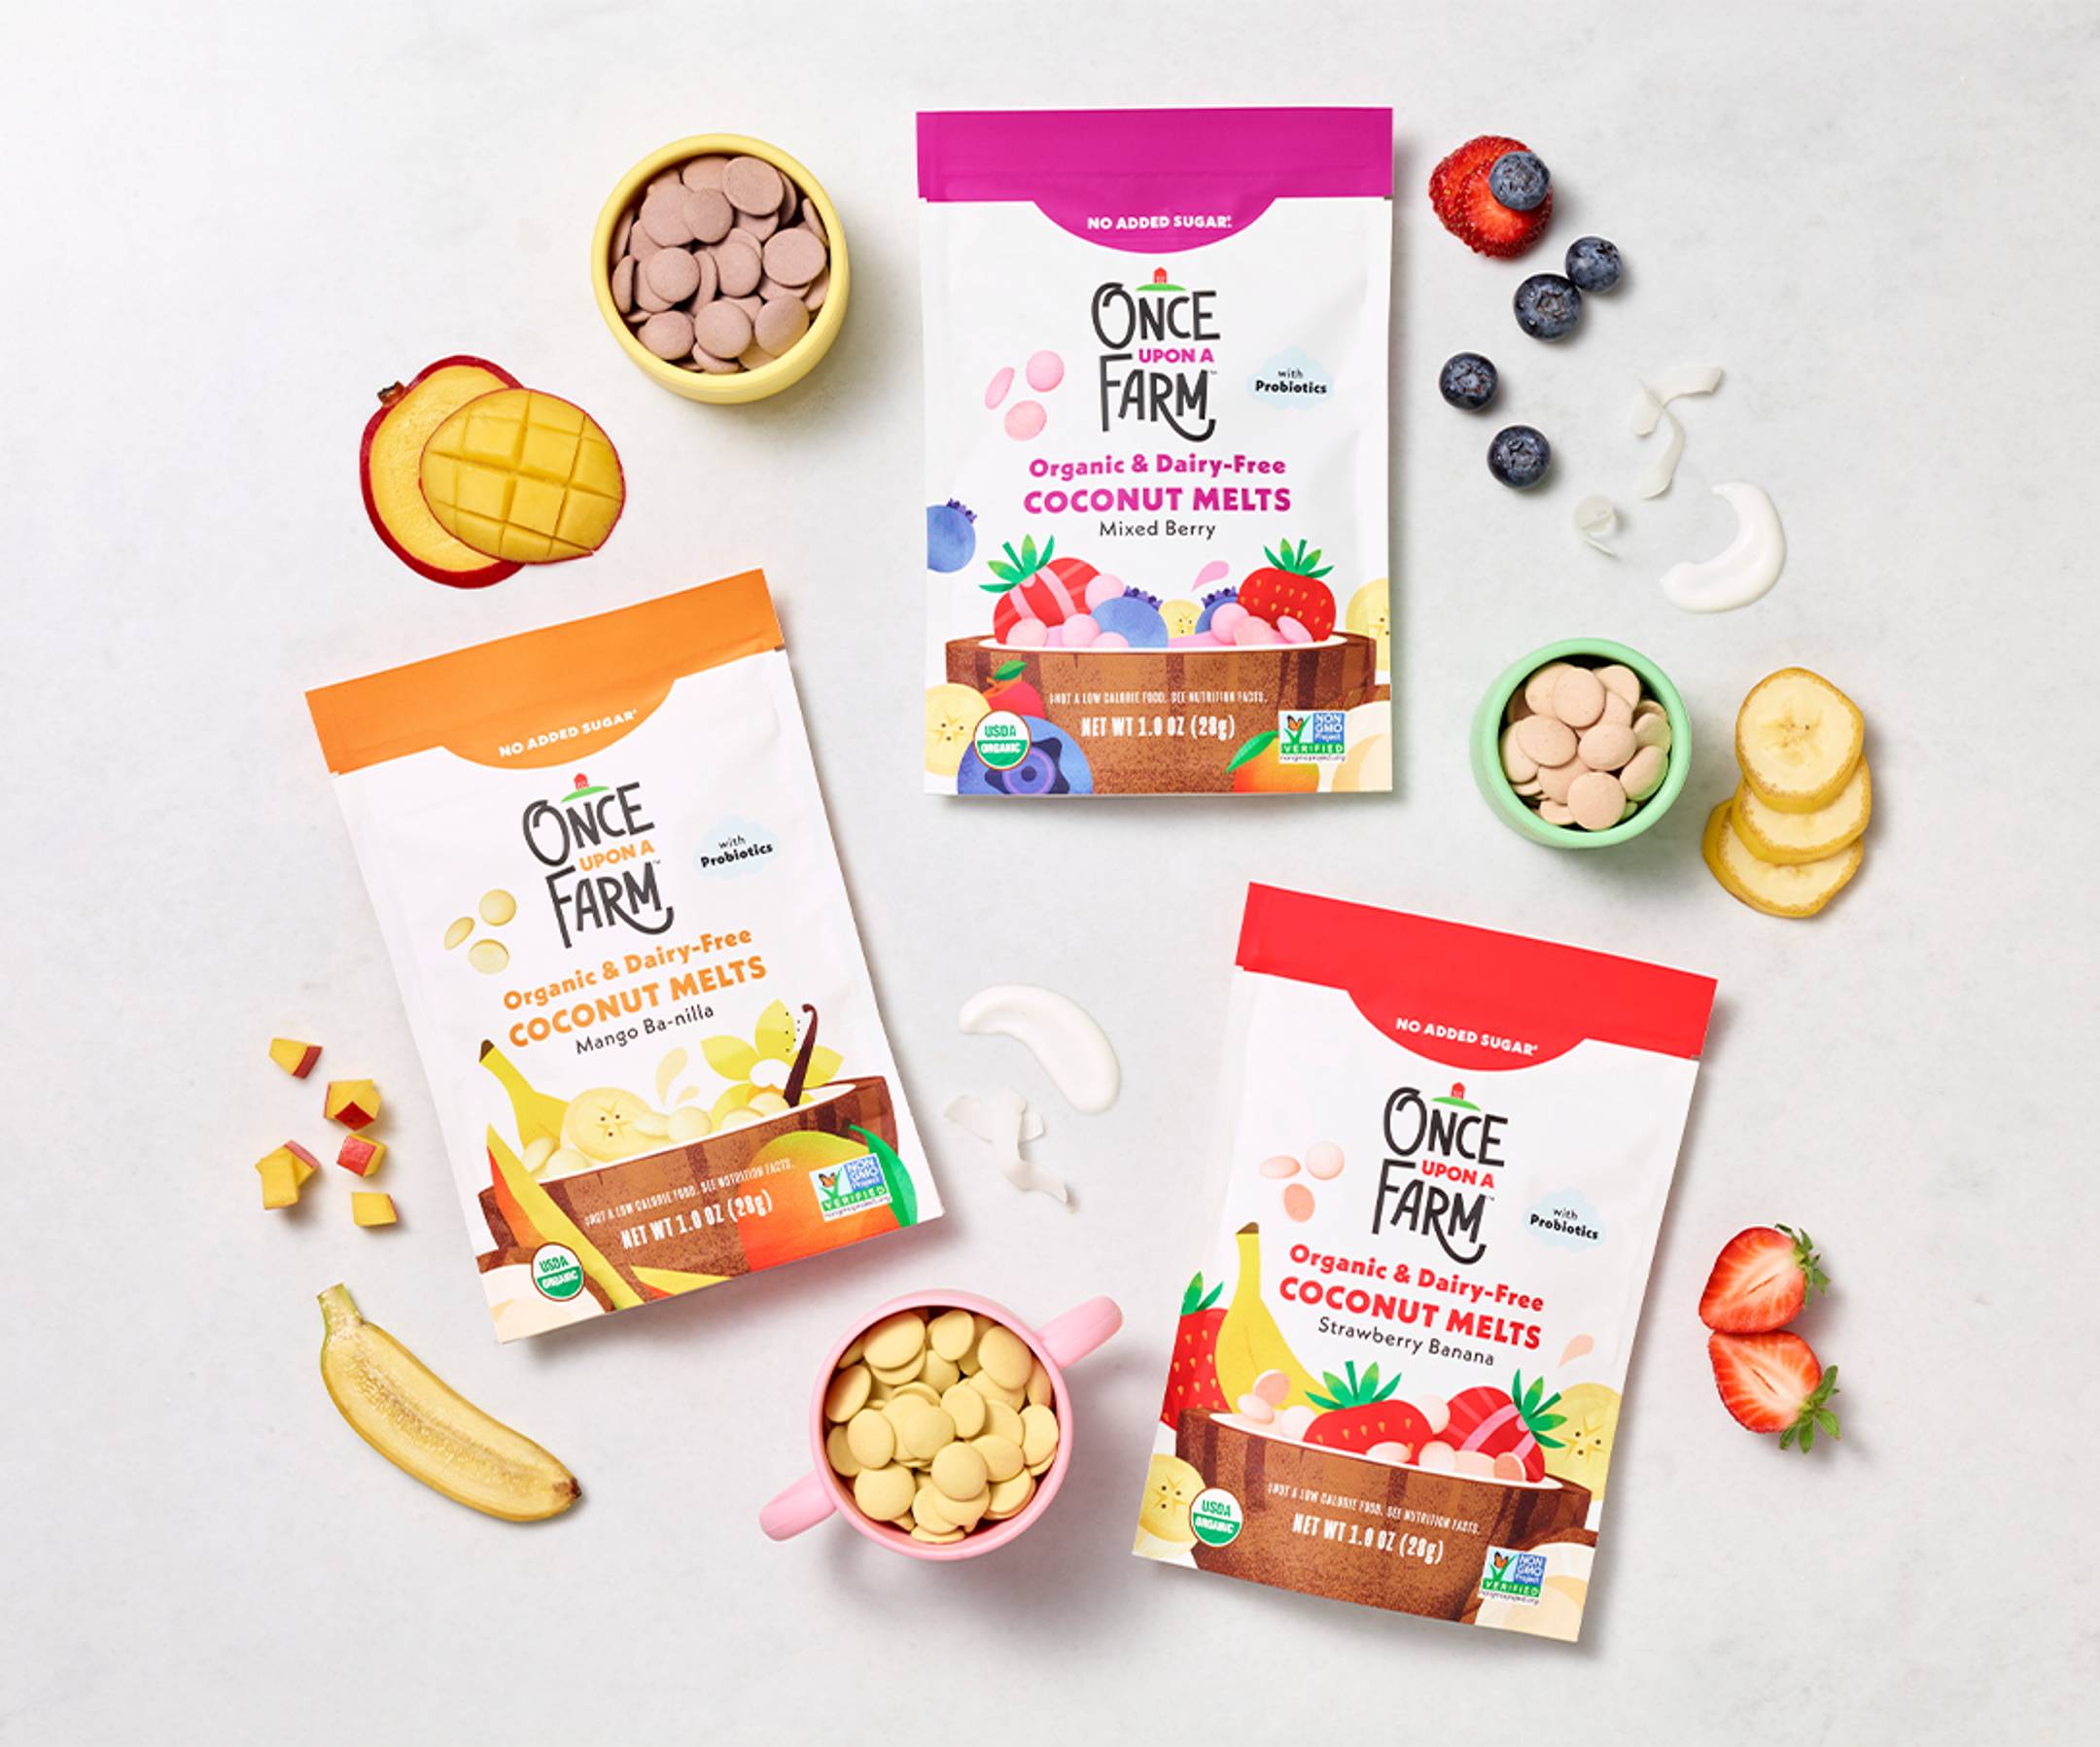 Image of our new baby & toddler pantry snack - coconut melts shot in a studio in 3 flavors: Mango Ba-nilla, Mixed Berry, and Strawberry Banana. With real fruit ingredients in the background. 